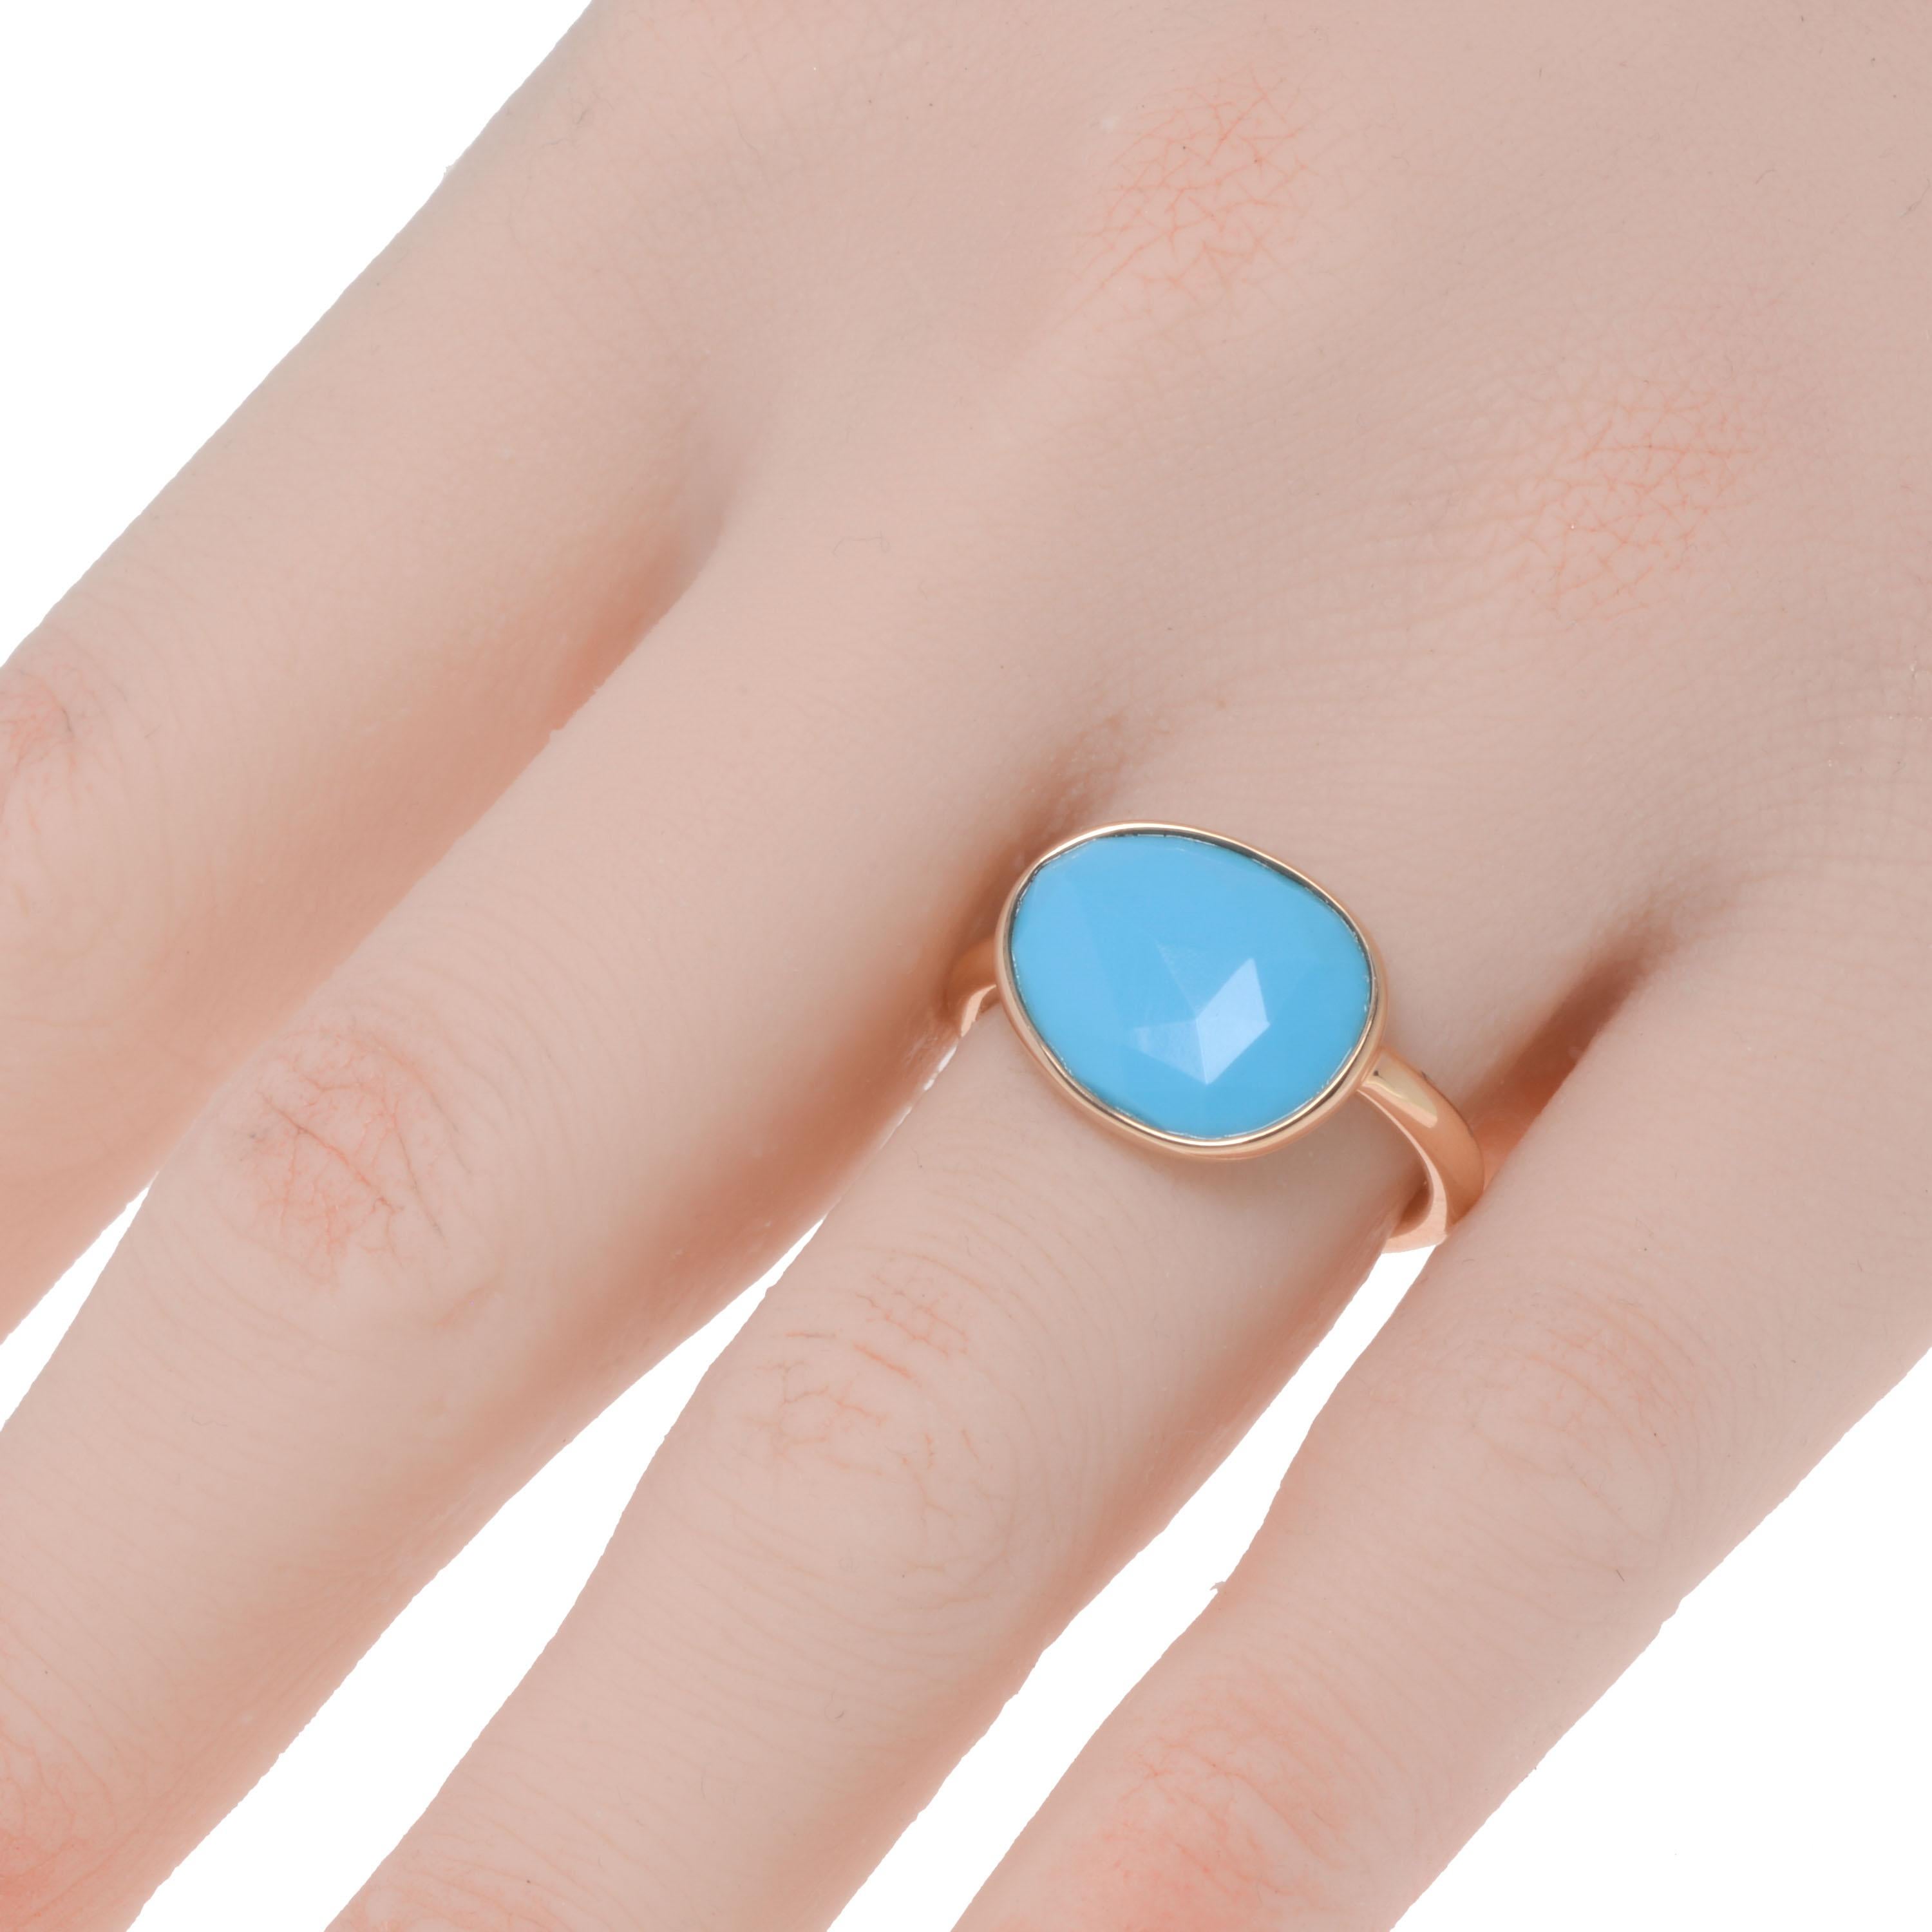 This contemporary Mimi Milano 18K rose gold cocktail ring features a faceted, asymmetrical turquoise framed in shiny 18K rose gold on a thin band. The ring size is 6.75. The decoration size is 5/8